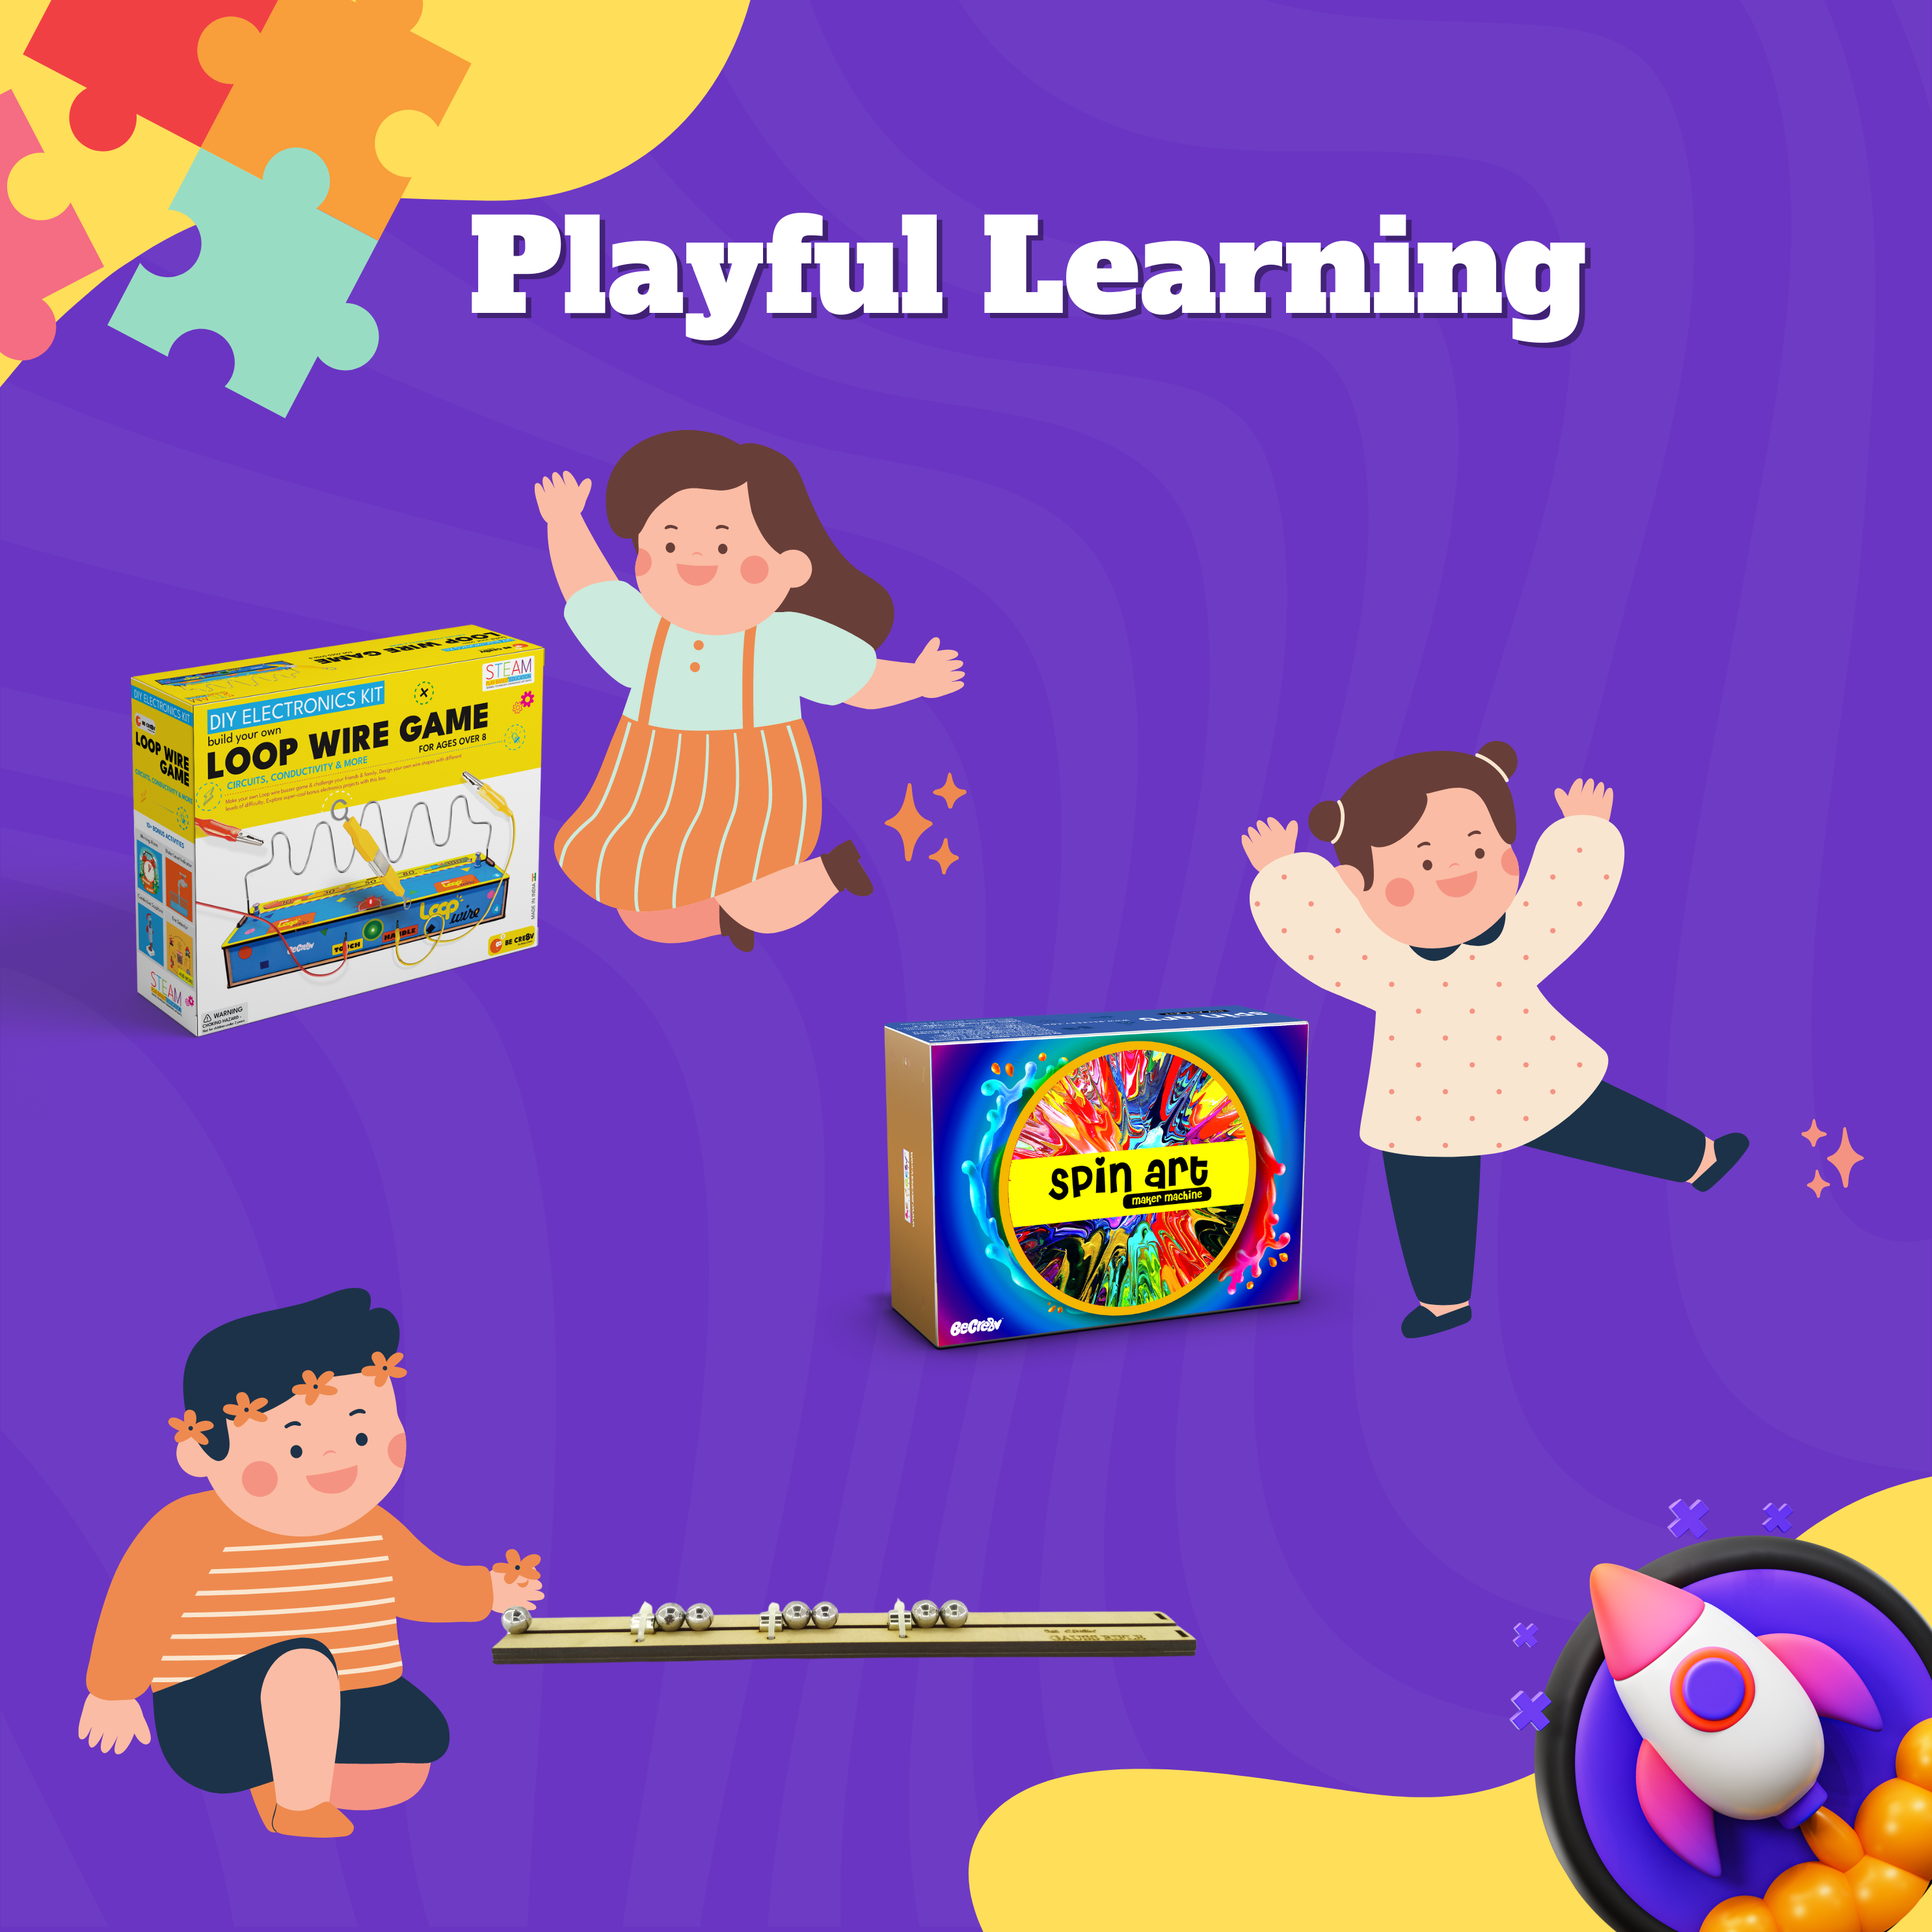 PLAYFUL LEARNING AND IT'S IMPORTANCE